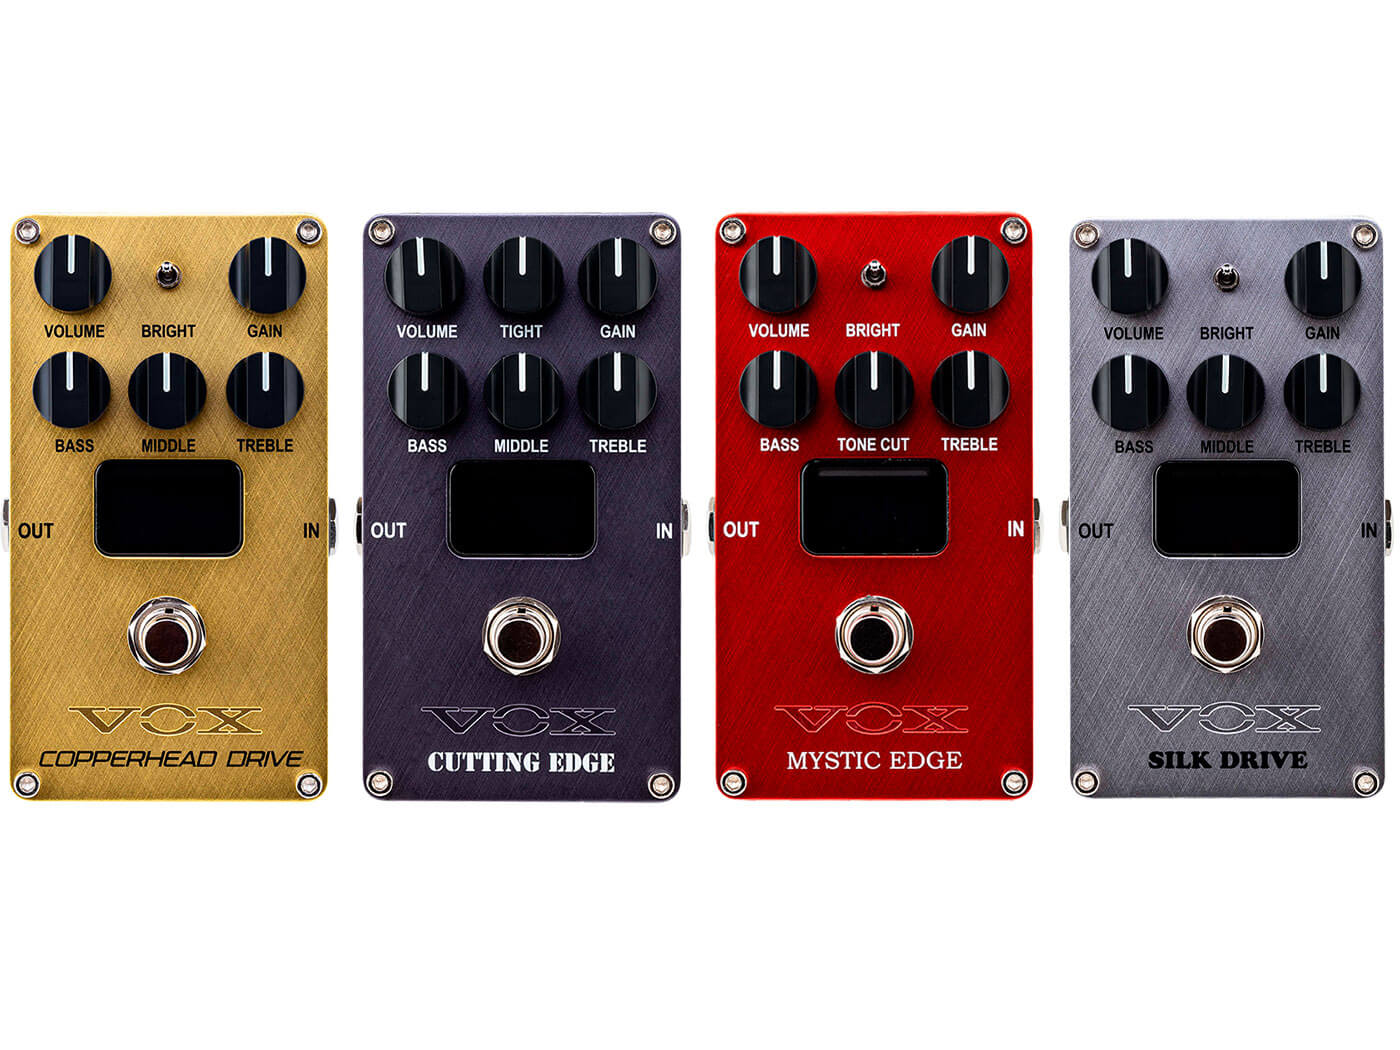 The new VOX Nutube pedals